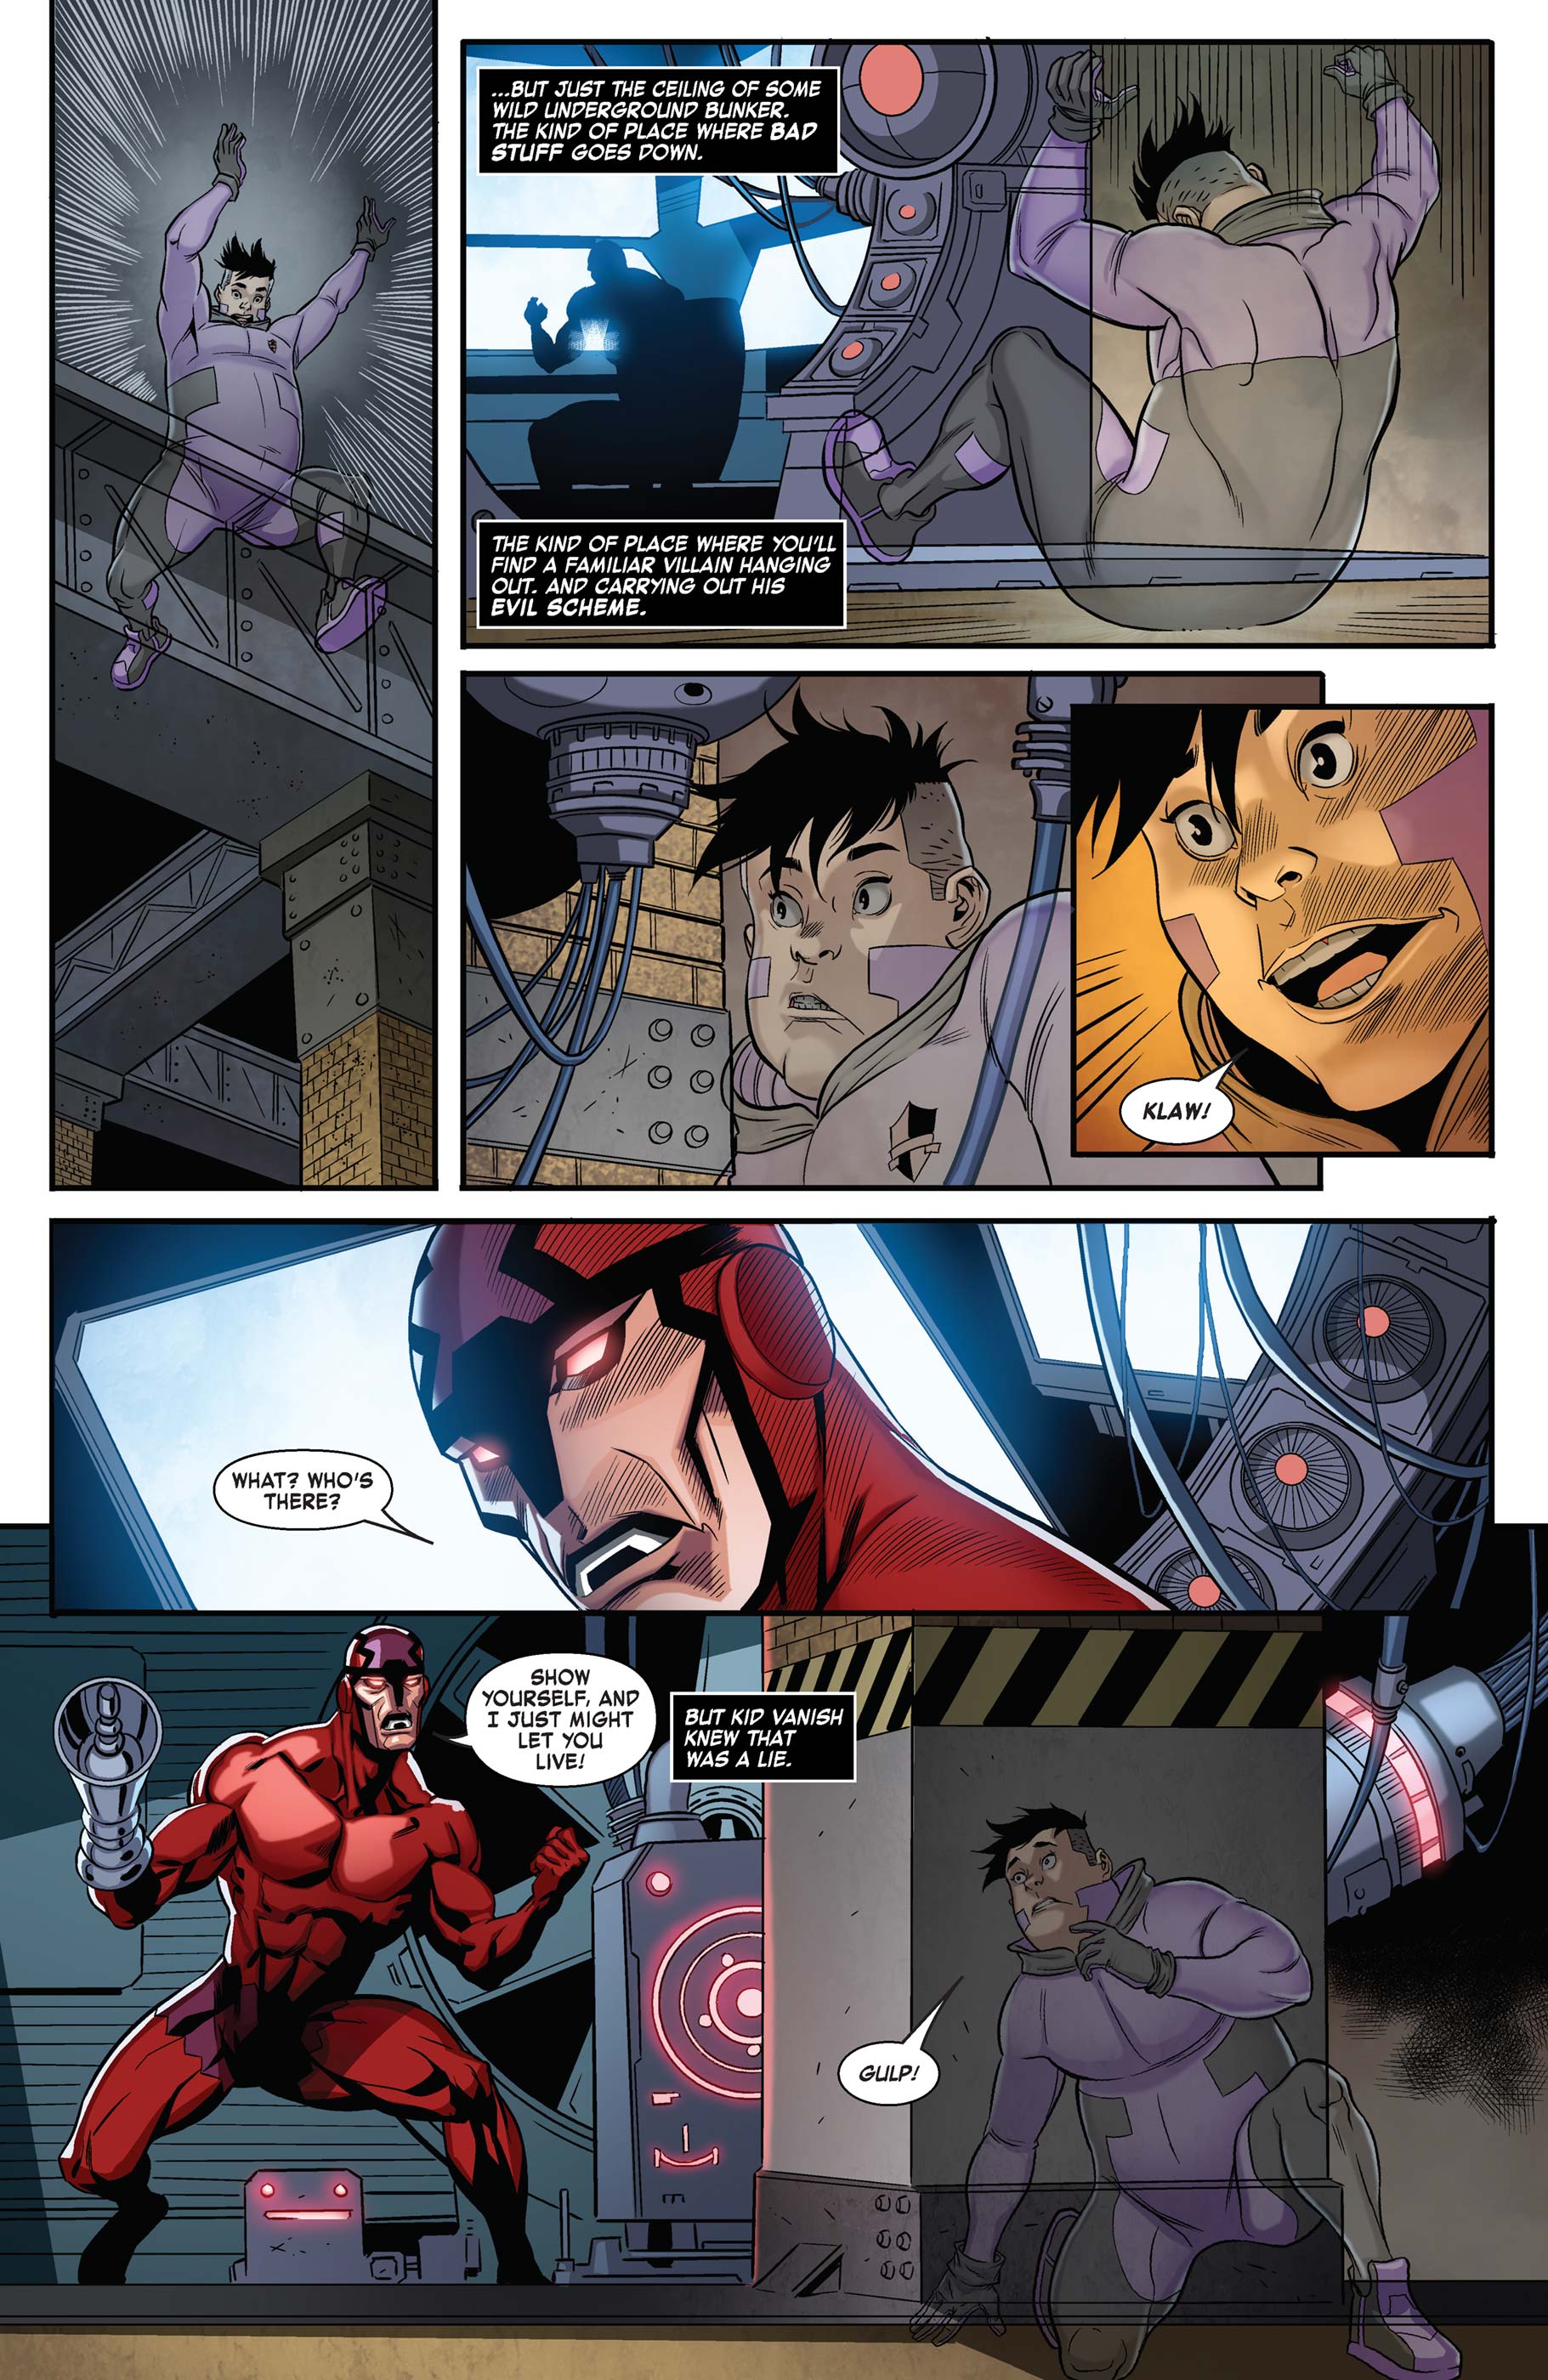 AXE: The Freshmen Issue Featuring The Avengers Full Page 8